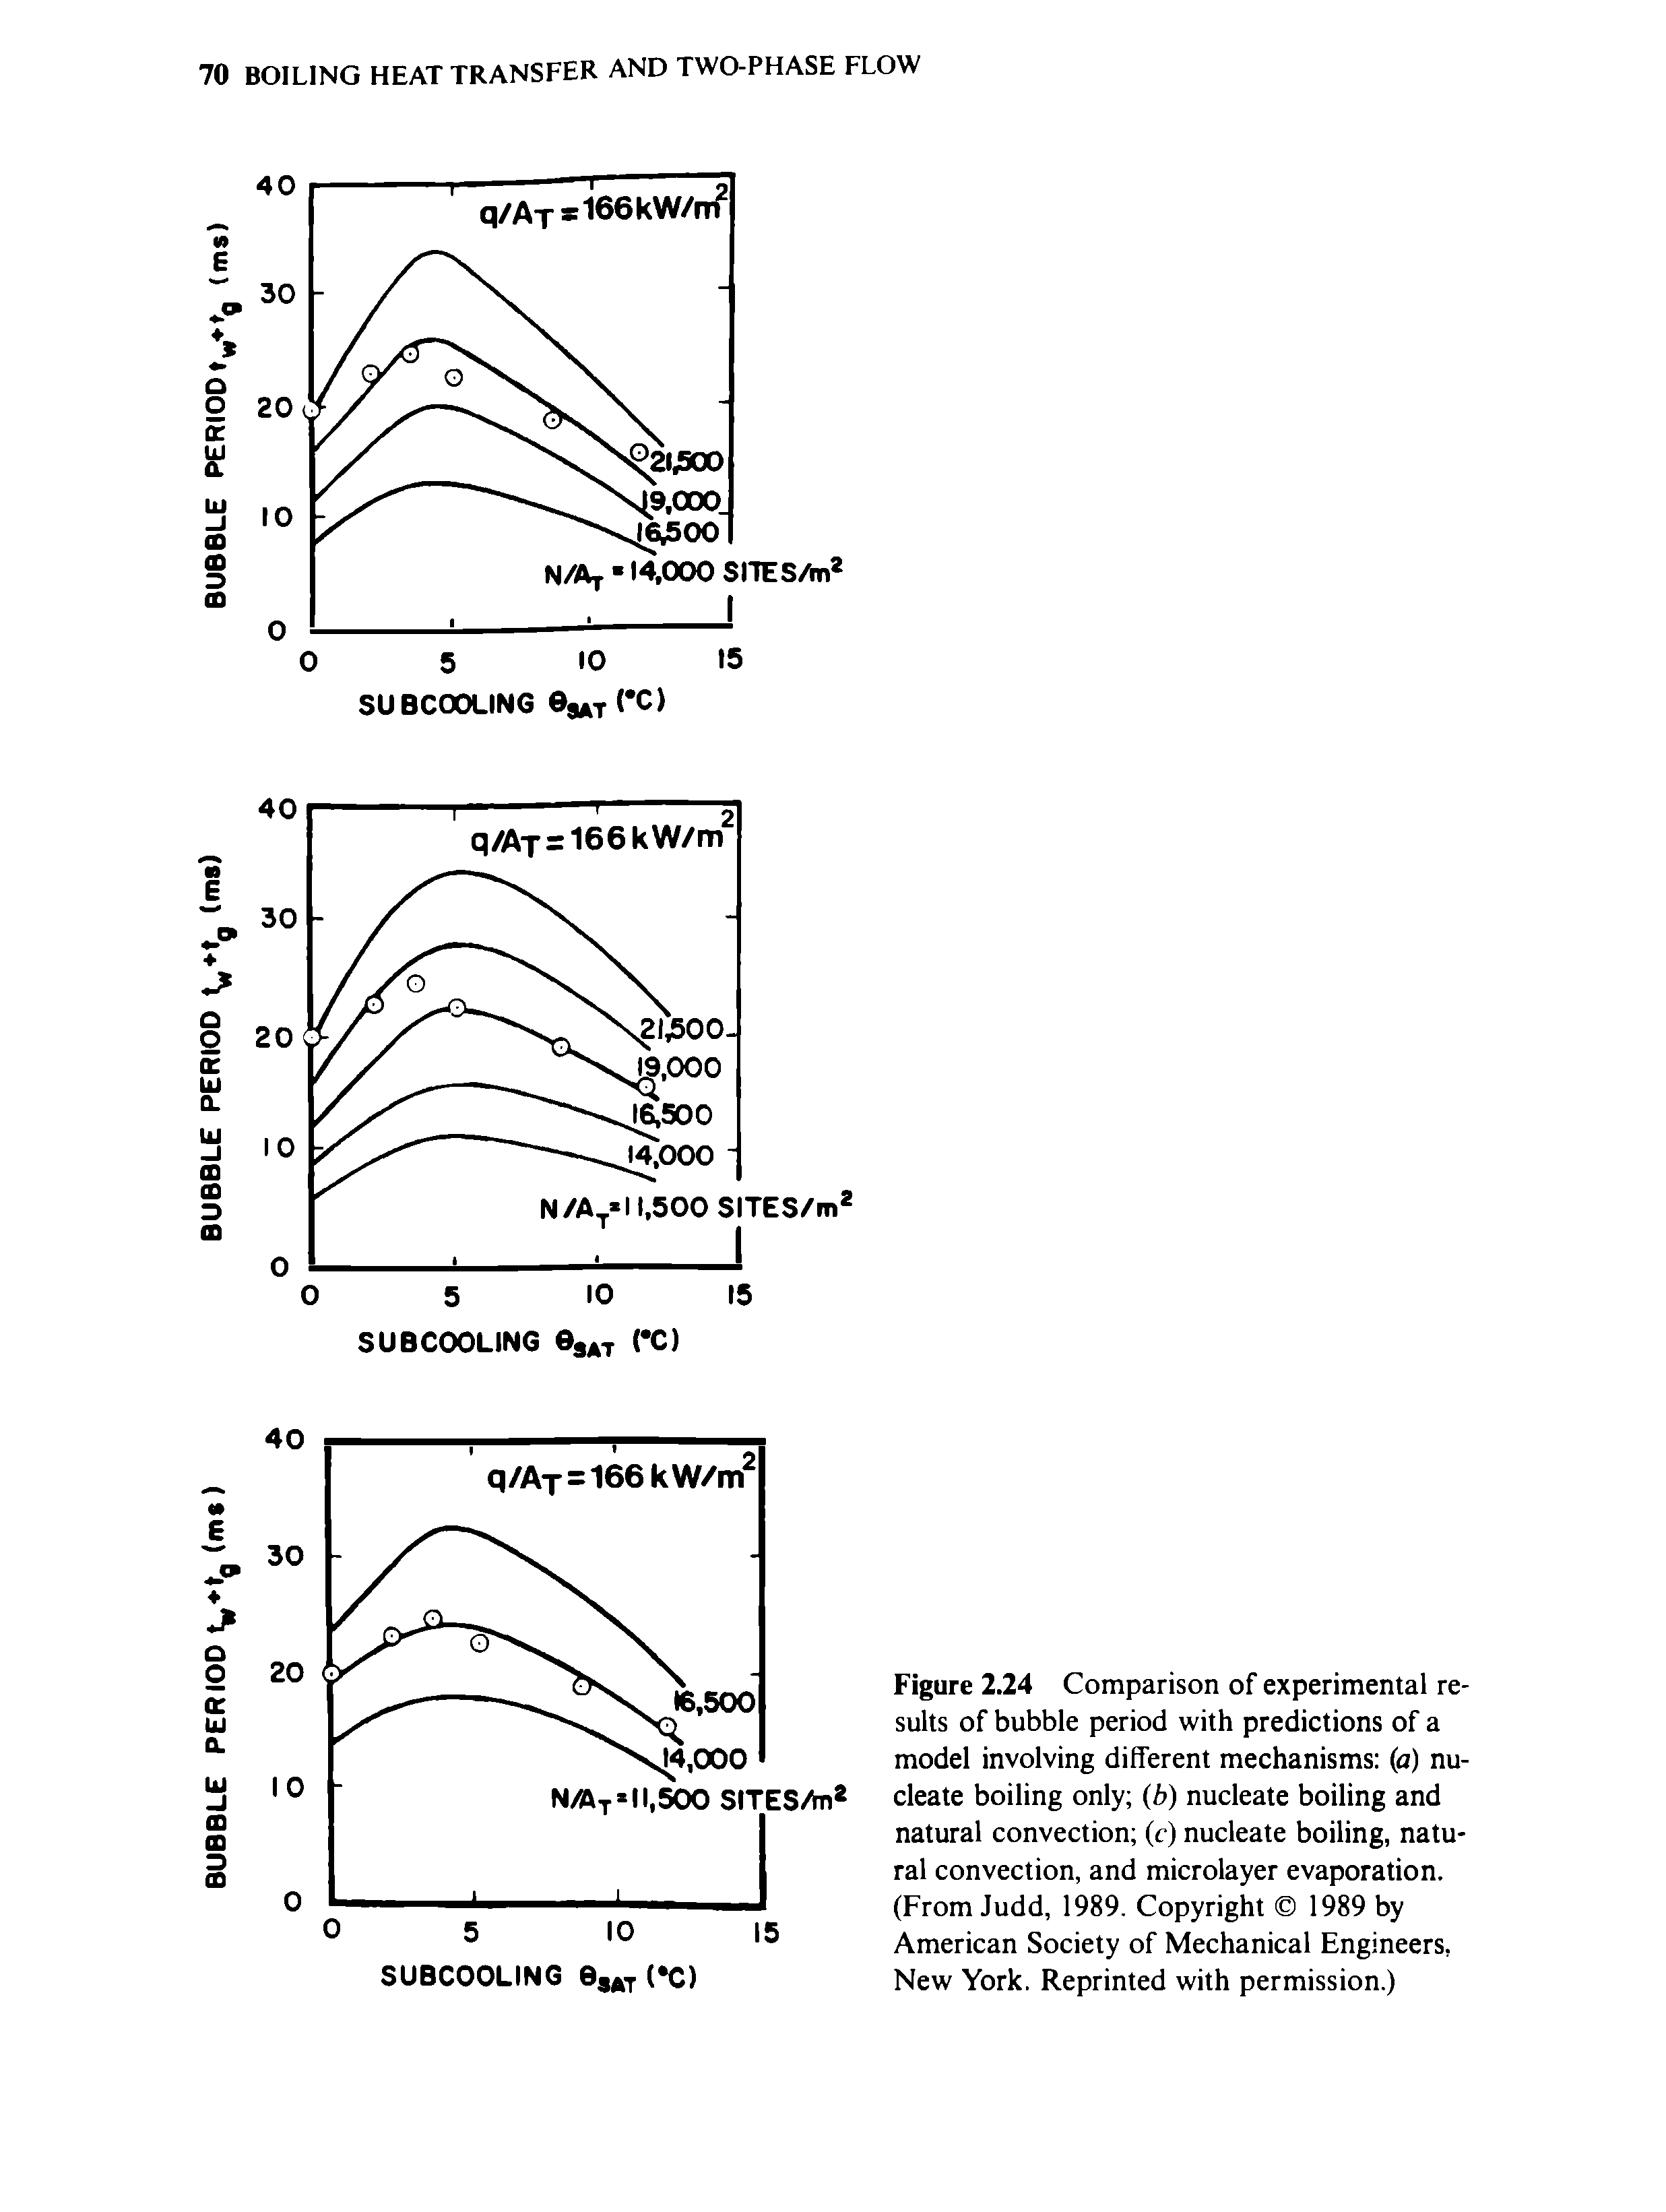 Figure 2.24 Comparison of experimental results of bubble period with predictions of a model involving different mechanisms (a) nucleate boiling only (b) nucleate boiling and natural convection (c) nucleate boiling, natural convection, and microlayer evaporation. (From Judd, 1989. Copyright 1989 by American Society of Mechanical Engineers, New York. Reprinted with permission.)...